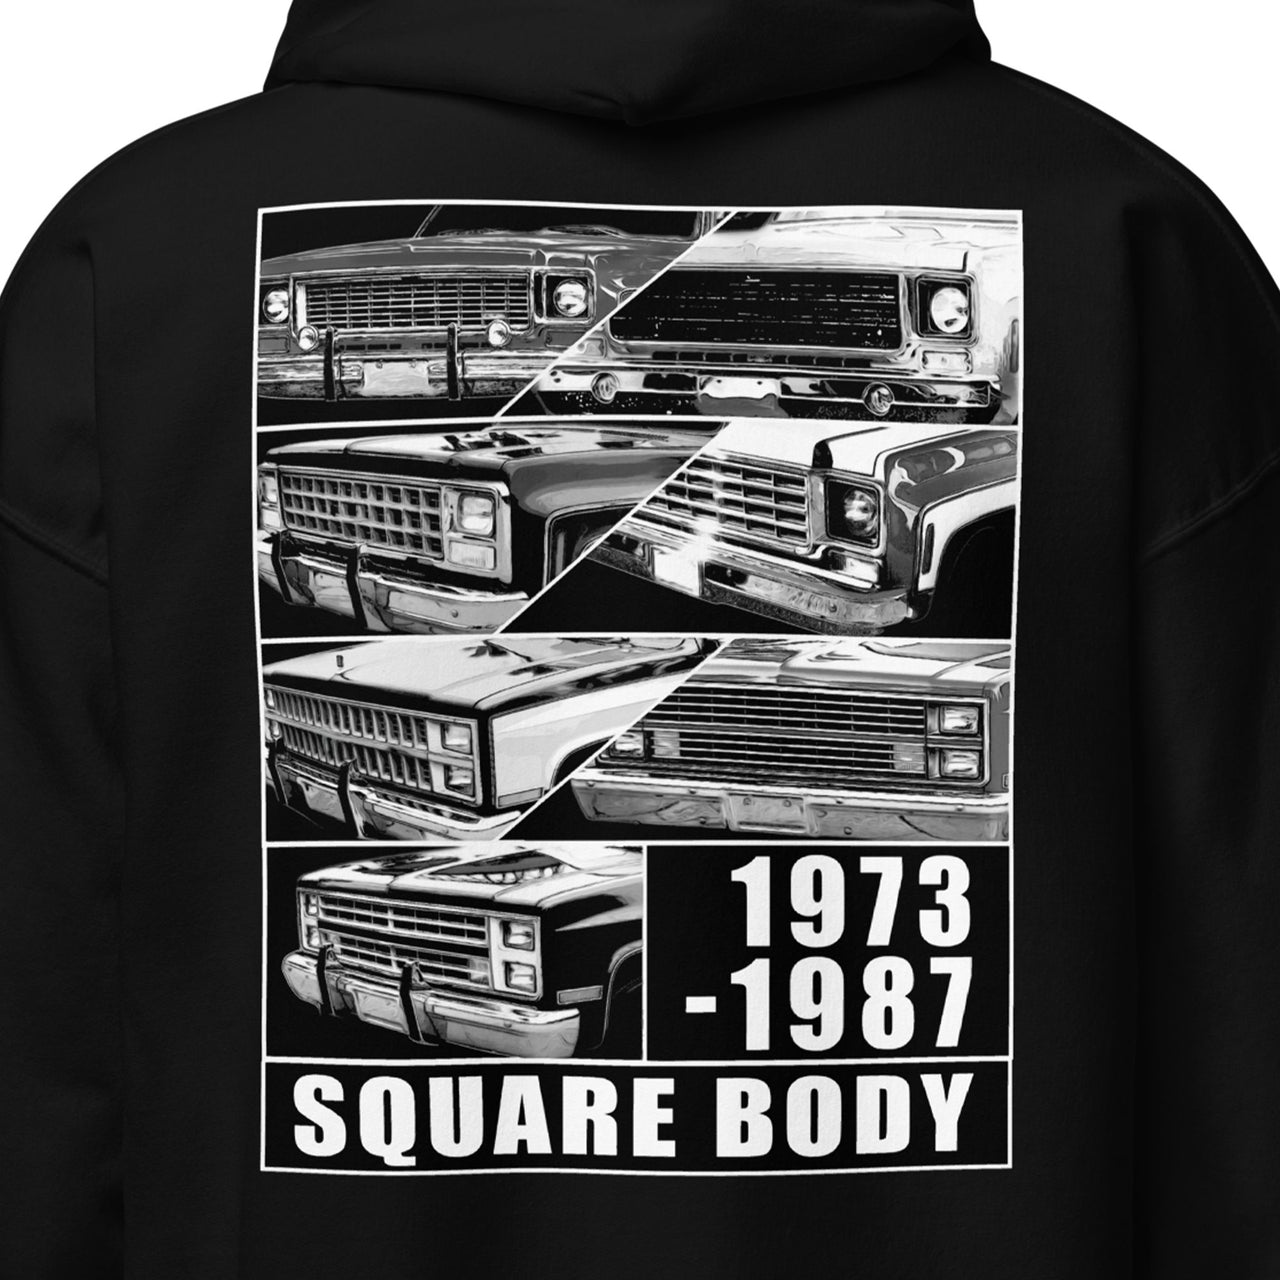 1973-1987 Square Body Grilles Hoodie in black close up of back design